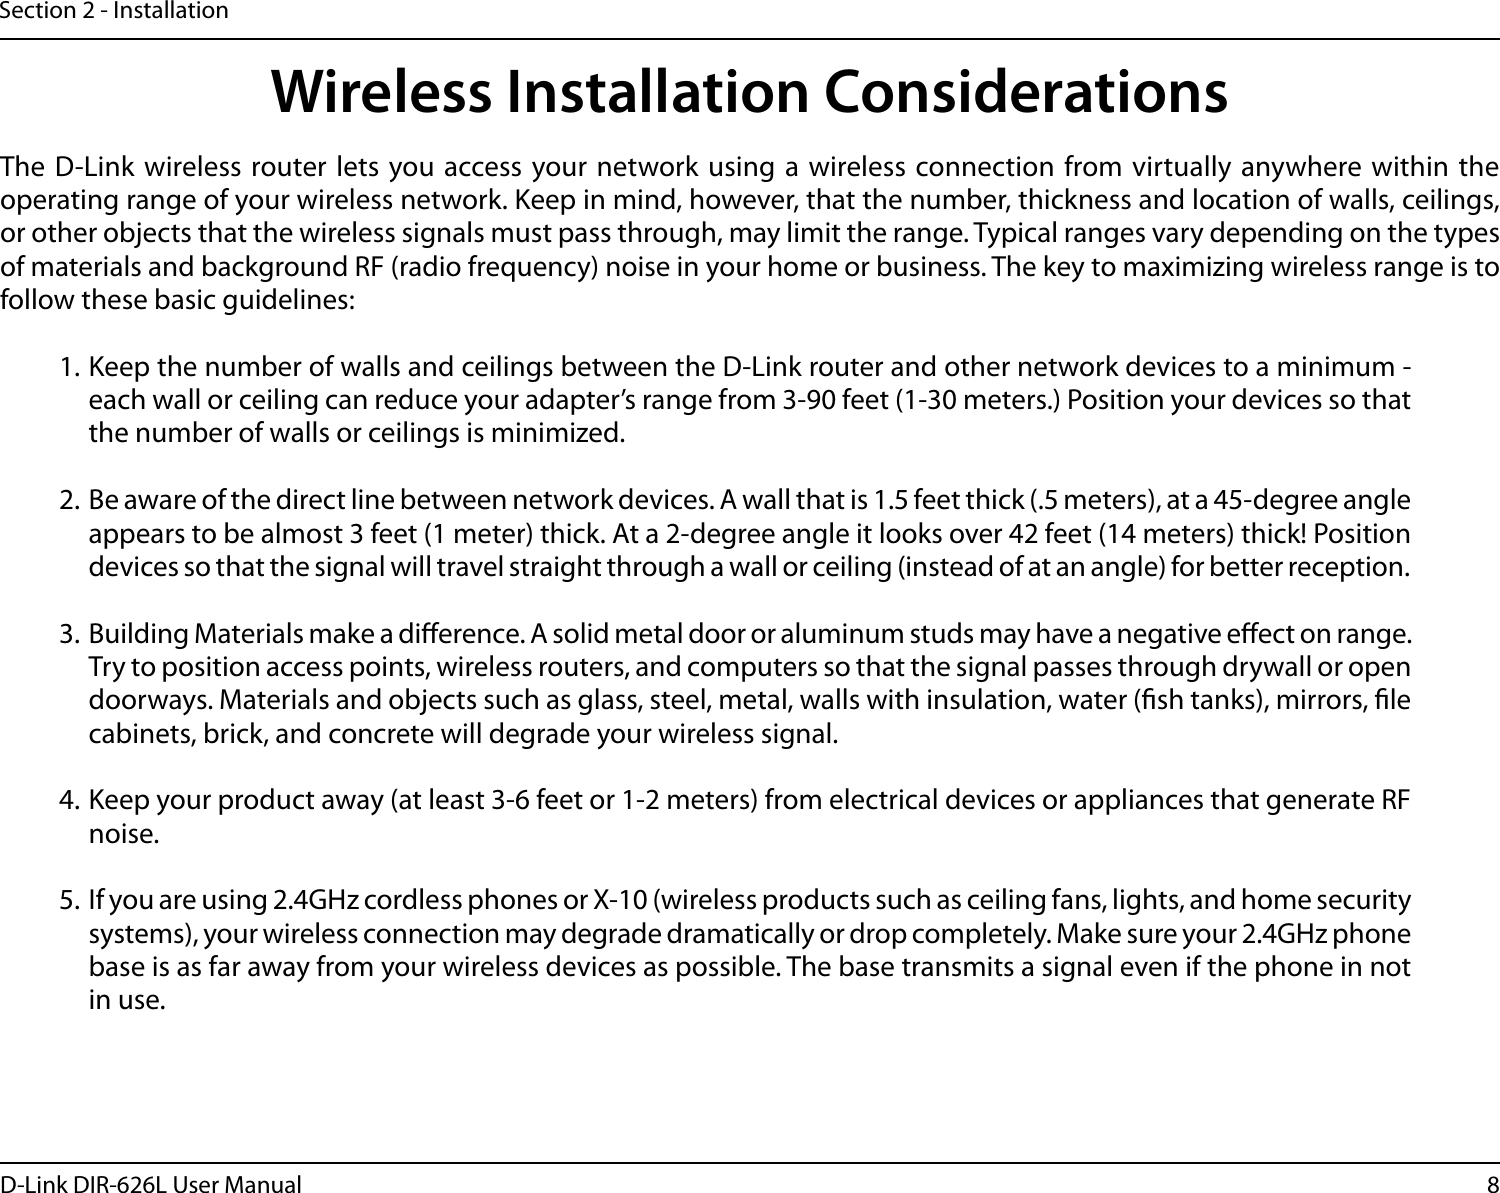 8D-Link DIR-626L User ManualSection 2 - InstallationWireless Installation ConsiderationsThe D-Link wireless router lets you access your network using a wireless connection from virtually anywhere within the operating range of your wireless network. Keep in mind, however, that the number, thickness and location of walls, ceilings, or other objects that the wireless signals must pass through, may limit the range. Typical ranges vary depending on the types of materials and background RF (radio frequency) noise in your home or business. The key to maximizing wireless range is to follow these basic guidelines:1. Keep the number of walls and ceilings between the D-Link router and other network devices to a minimum - each wall or ceiling can reduce your adapter’s range from 3-90 feet (1-30 meters.) Position your devices so that the number of walls or ceilings is minimized.2. Be aware of the direct line between network devices. A wall that is 1.5 feet thick (.5 meters), at a 45-degree angle appears to be almost 3 feet (1 meter) thick. At a 2-degree angle it looks over 42 feet (14 meters) thick! Position devices so that the signal will travel straight through a wall or ceiling (instead of at an angle) for better reception.3. Building Materials make a dierence. A solid metal door or aluminum studs may have a negative eect on range. Try to position access points, wireless routers, and computers so that the signal passes through drywall or open doorways. Materials and objects such as glass, steel, metal, walls with insulation, water (sh tanks), mirrors, le cabinets, brick, and concrete will degrade your wireless signal.4. Keep your product away (at least 3-6 feet or 1-2 meters) from electrical devices or appliances that generate RF noise.5. If you are using 2.4GHz cordless phones or X-10 (wireless products such as ceiling fans, lights, and home security systems), your wireless connection may degrade dramatically or drop completely. Make sure your 2.4GHz phone base is as far away from your wireless devices as possible. The base transmits a signal even if the phone in not in use.